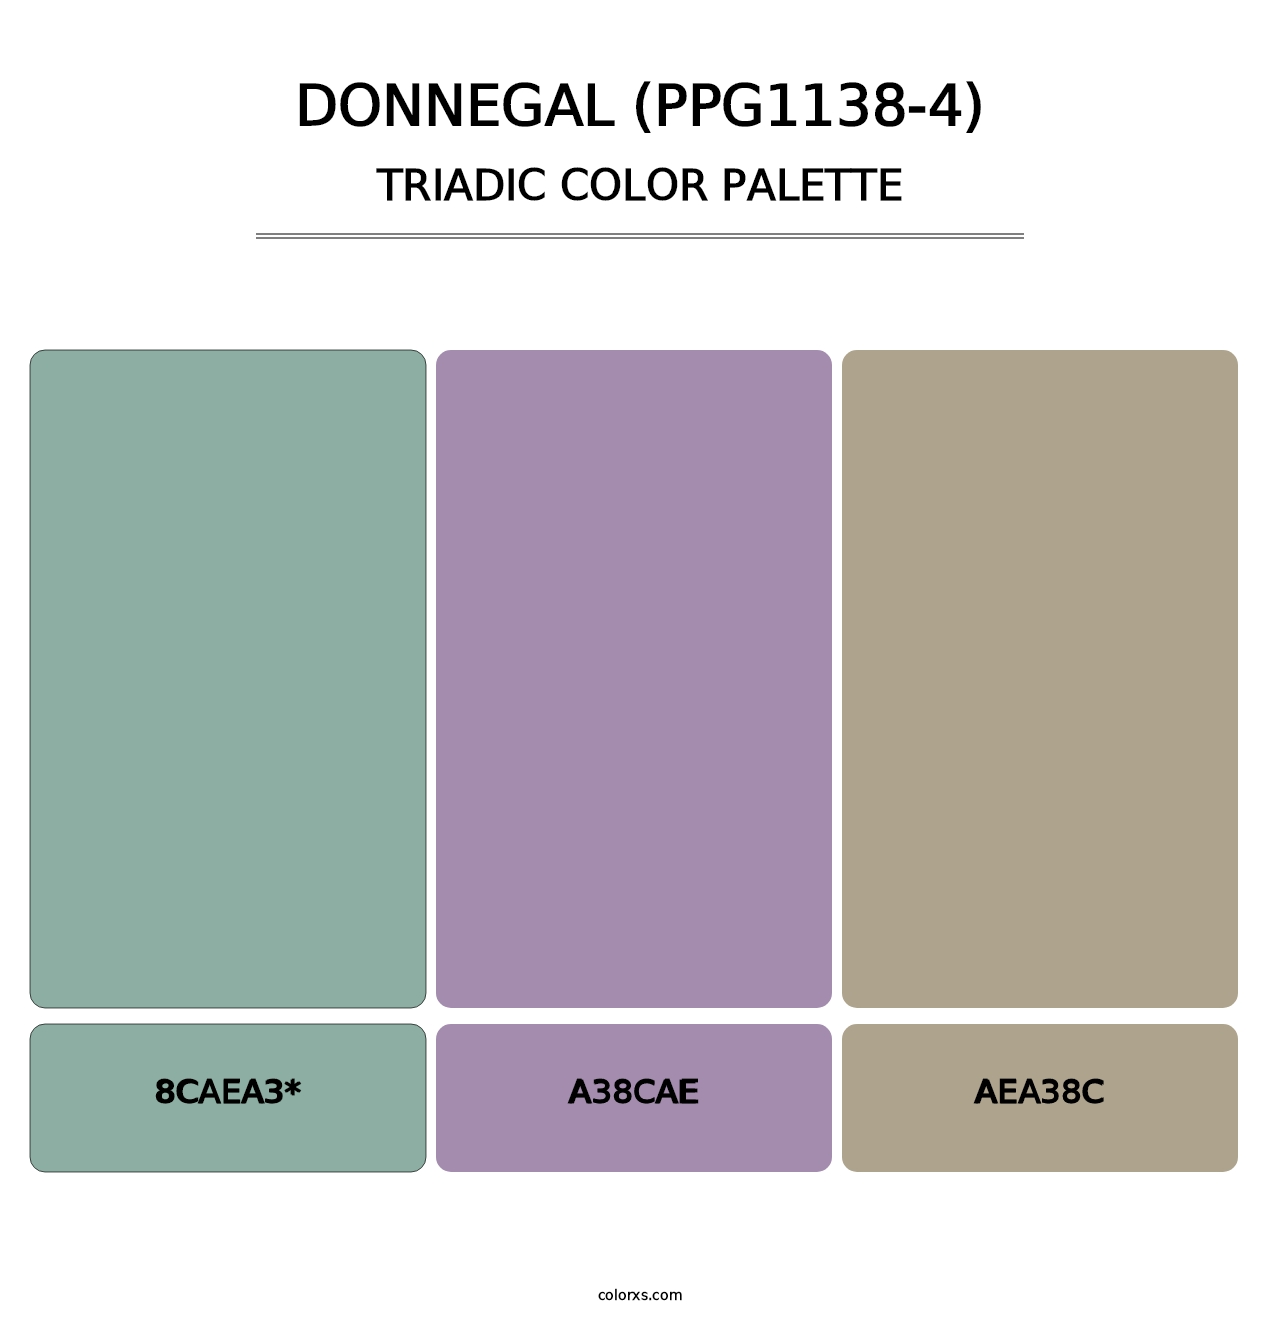 Donnegal (PPG1138-4) - Triadic Color Palette